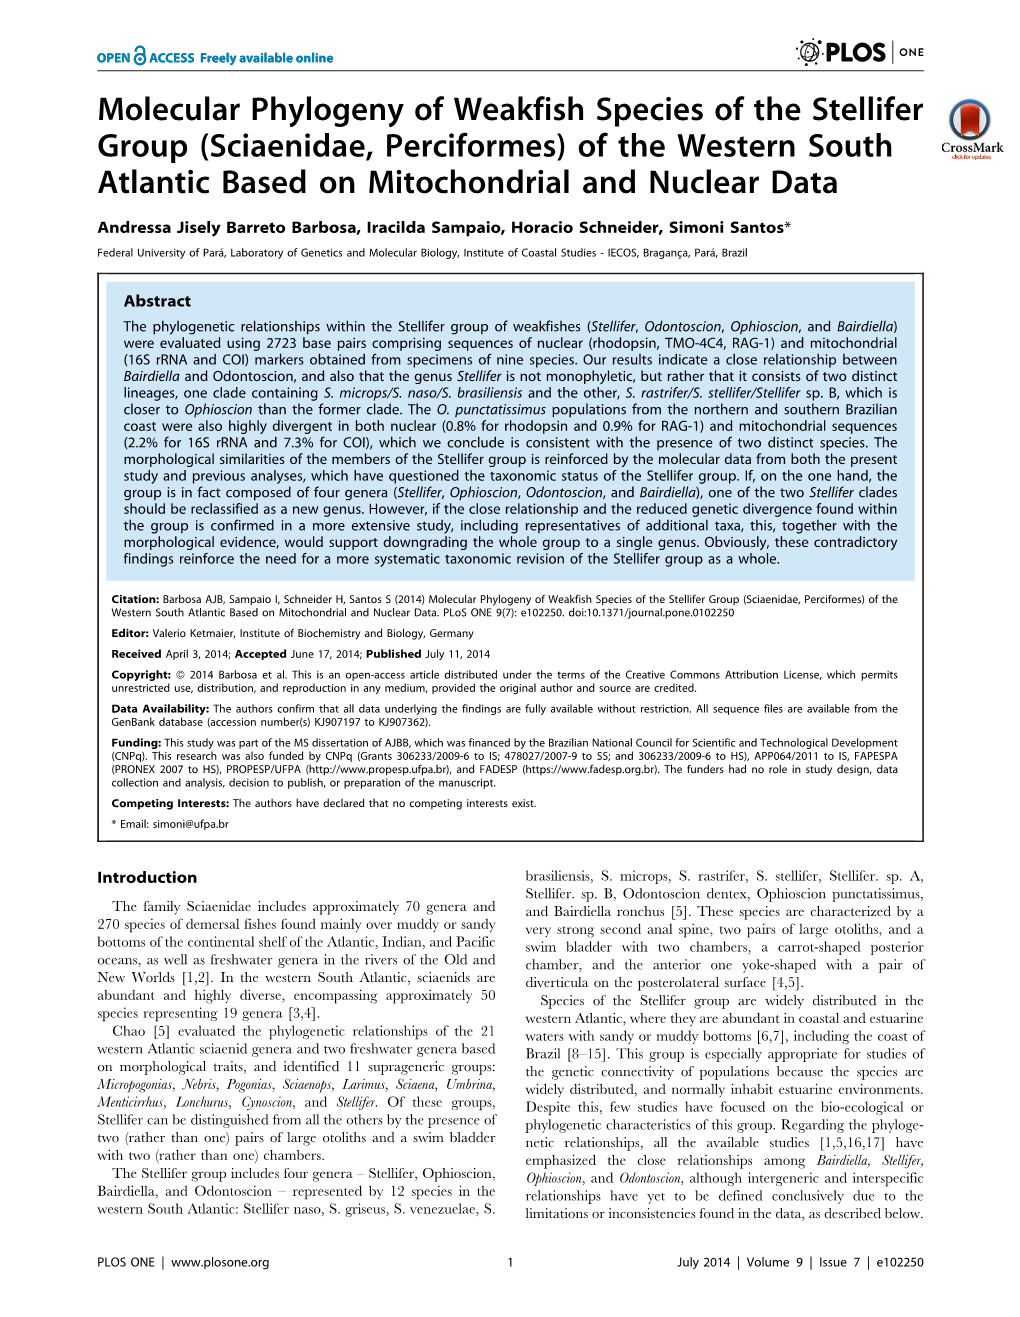 Molecular Phylogeny of Weakfish Species of the Stellifer Group (Sciaenidae, Perciformes) of the Western South Atlantic Based on Mitochondrial and Nuclear Data